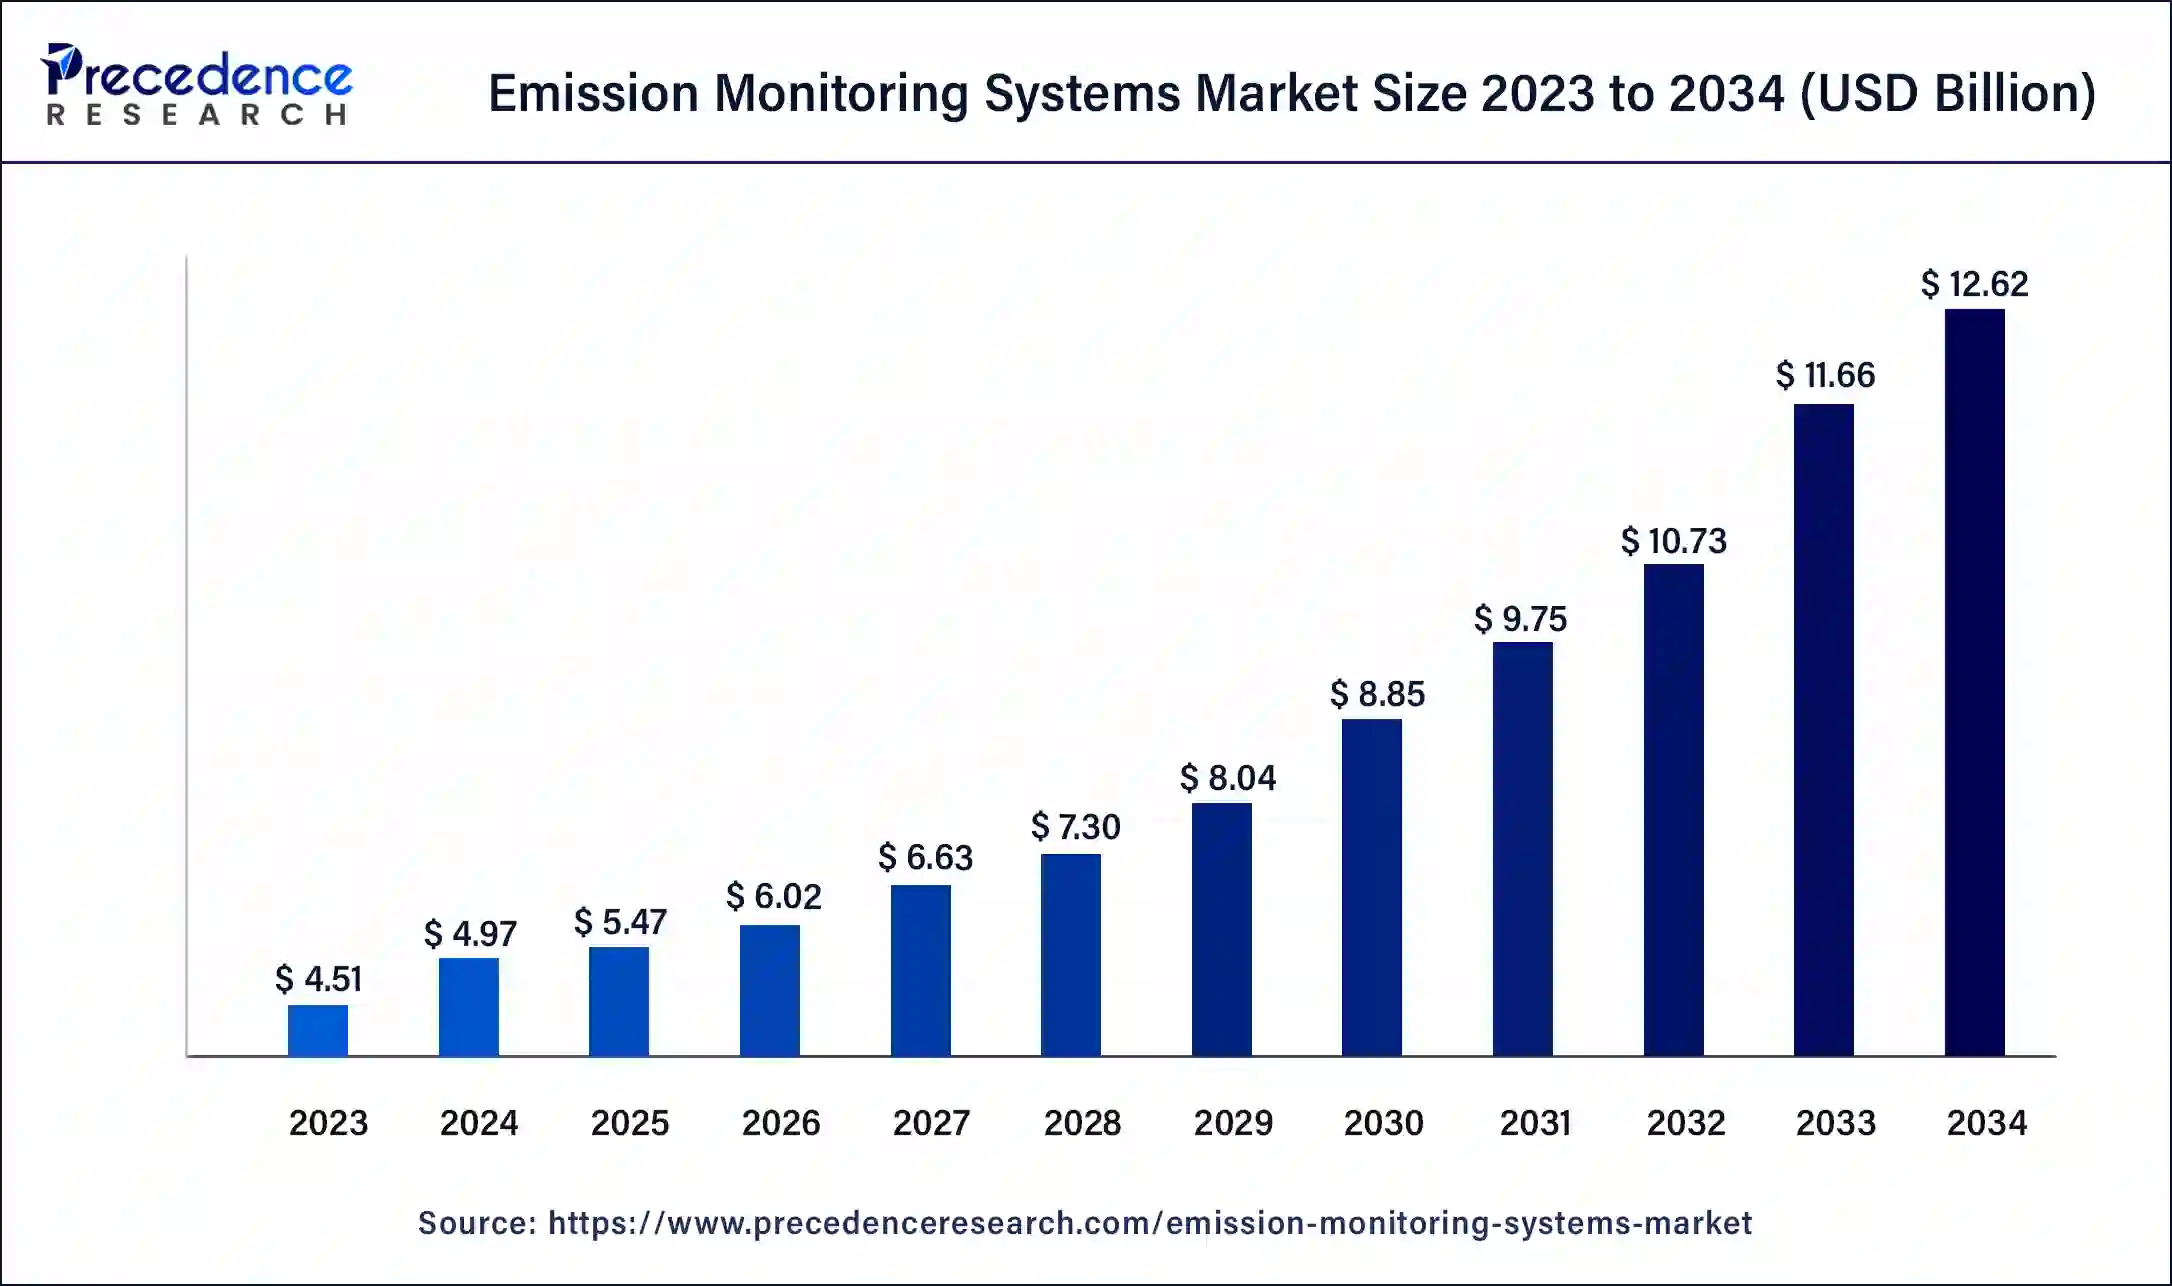 Emission Monitoring Systems Market Size 2024 to 2034